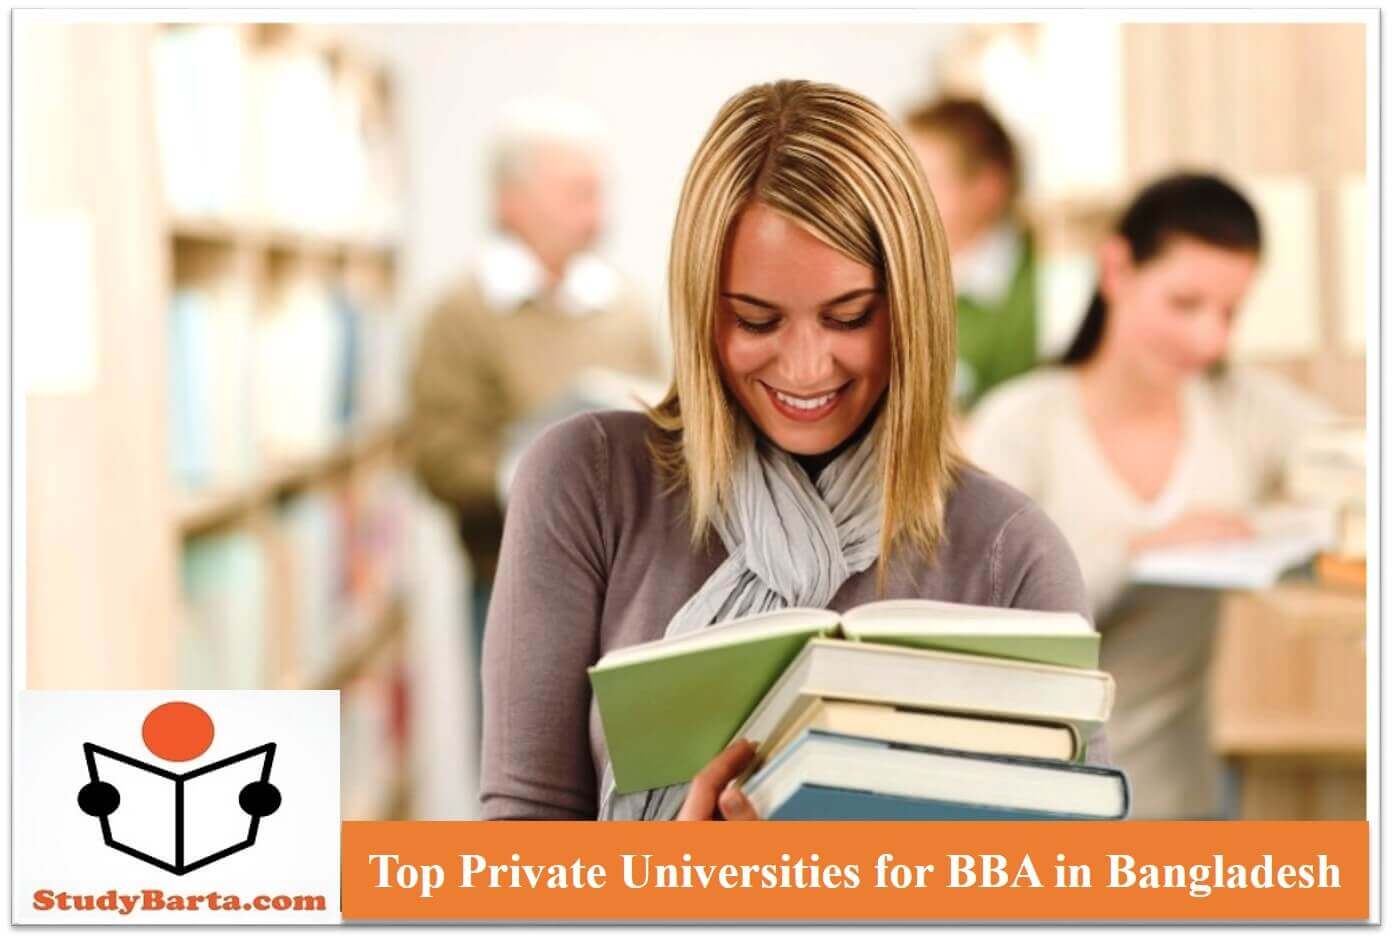 Top Private Universities for BBA in Bangladesh 2021